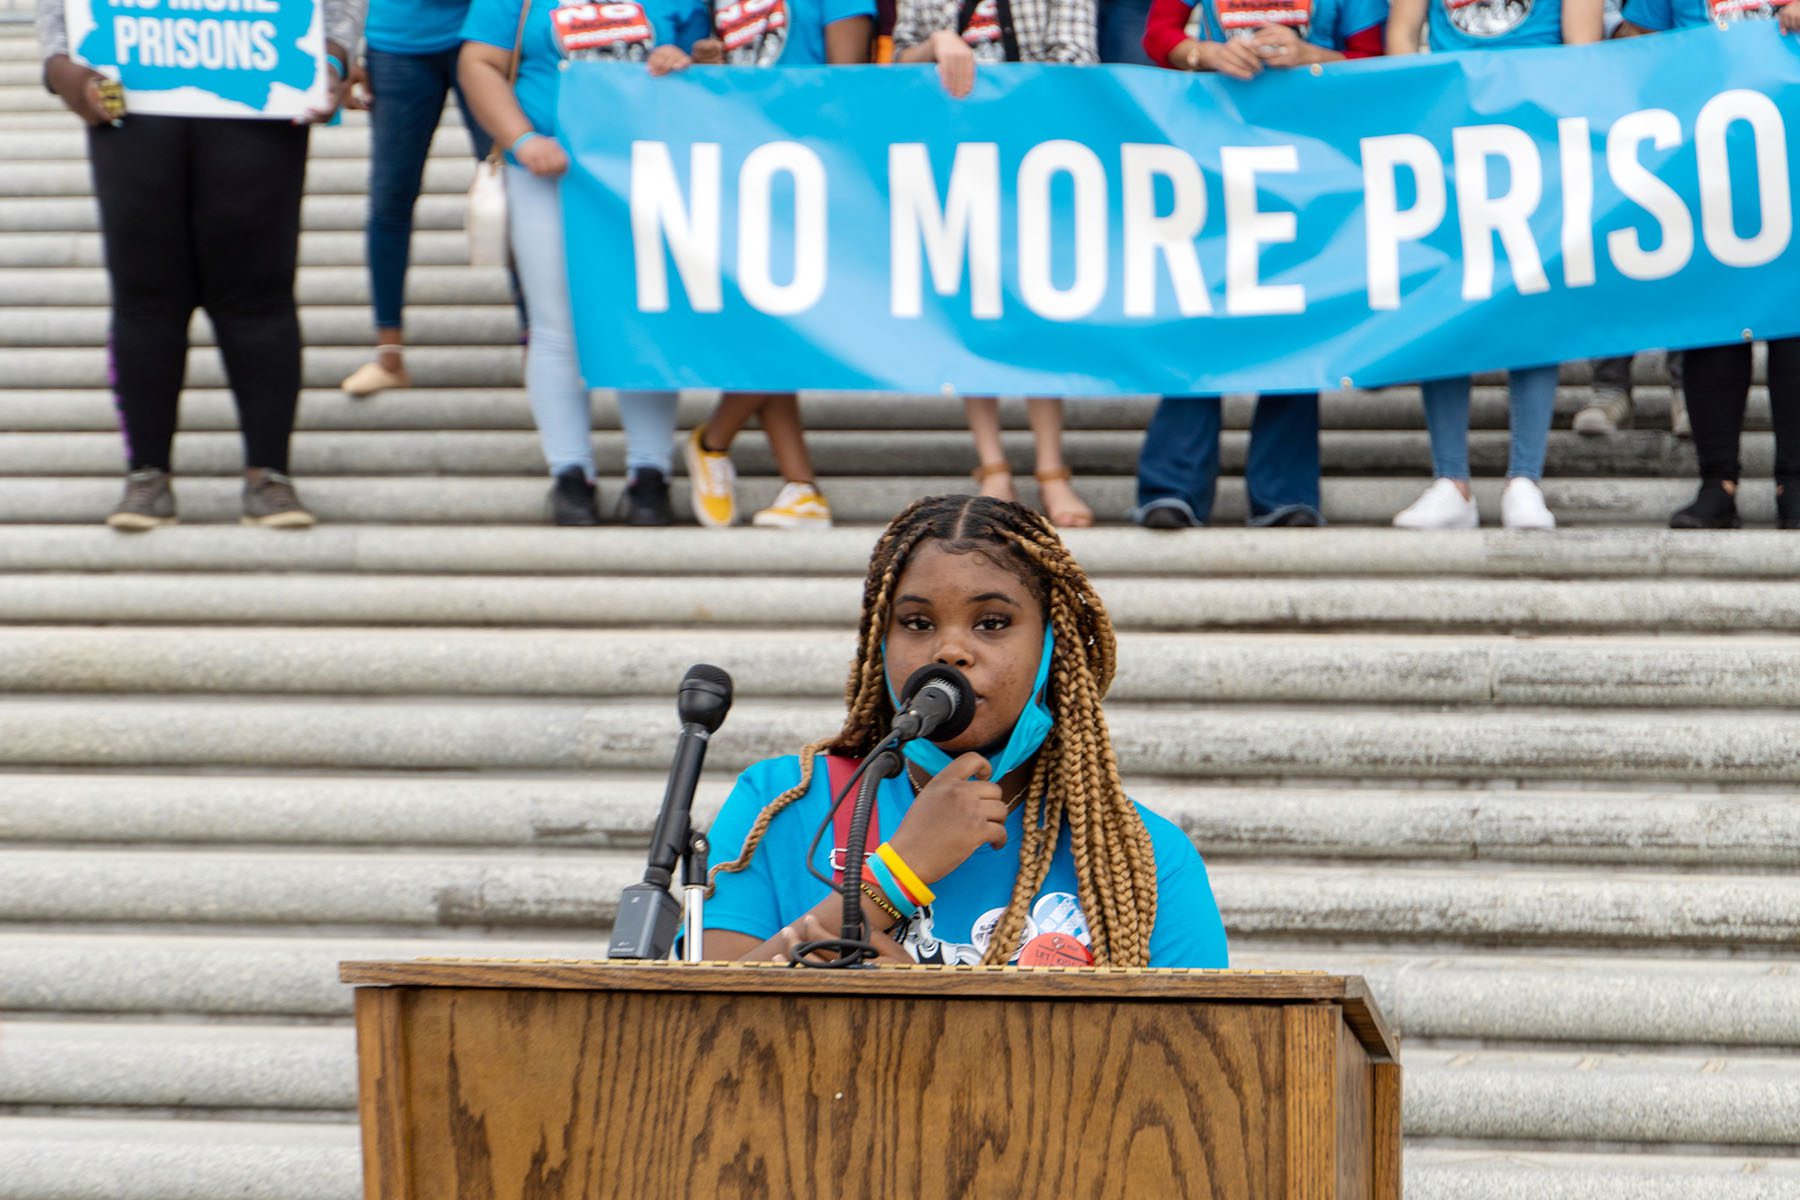 Tamia Cenance speaks at a podium as activists hold a banner that reads "no more prisons!" behind her.